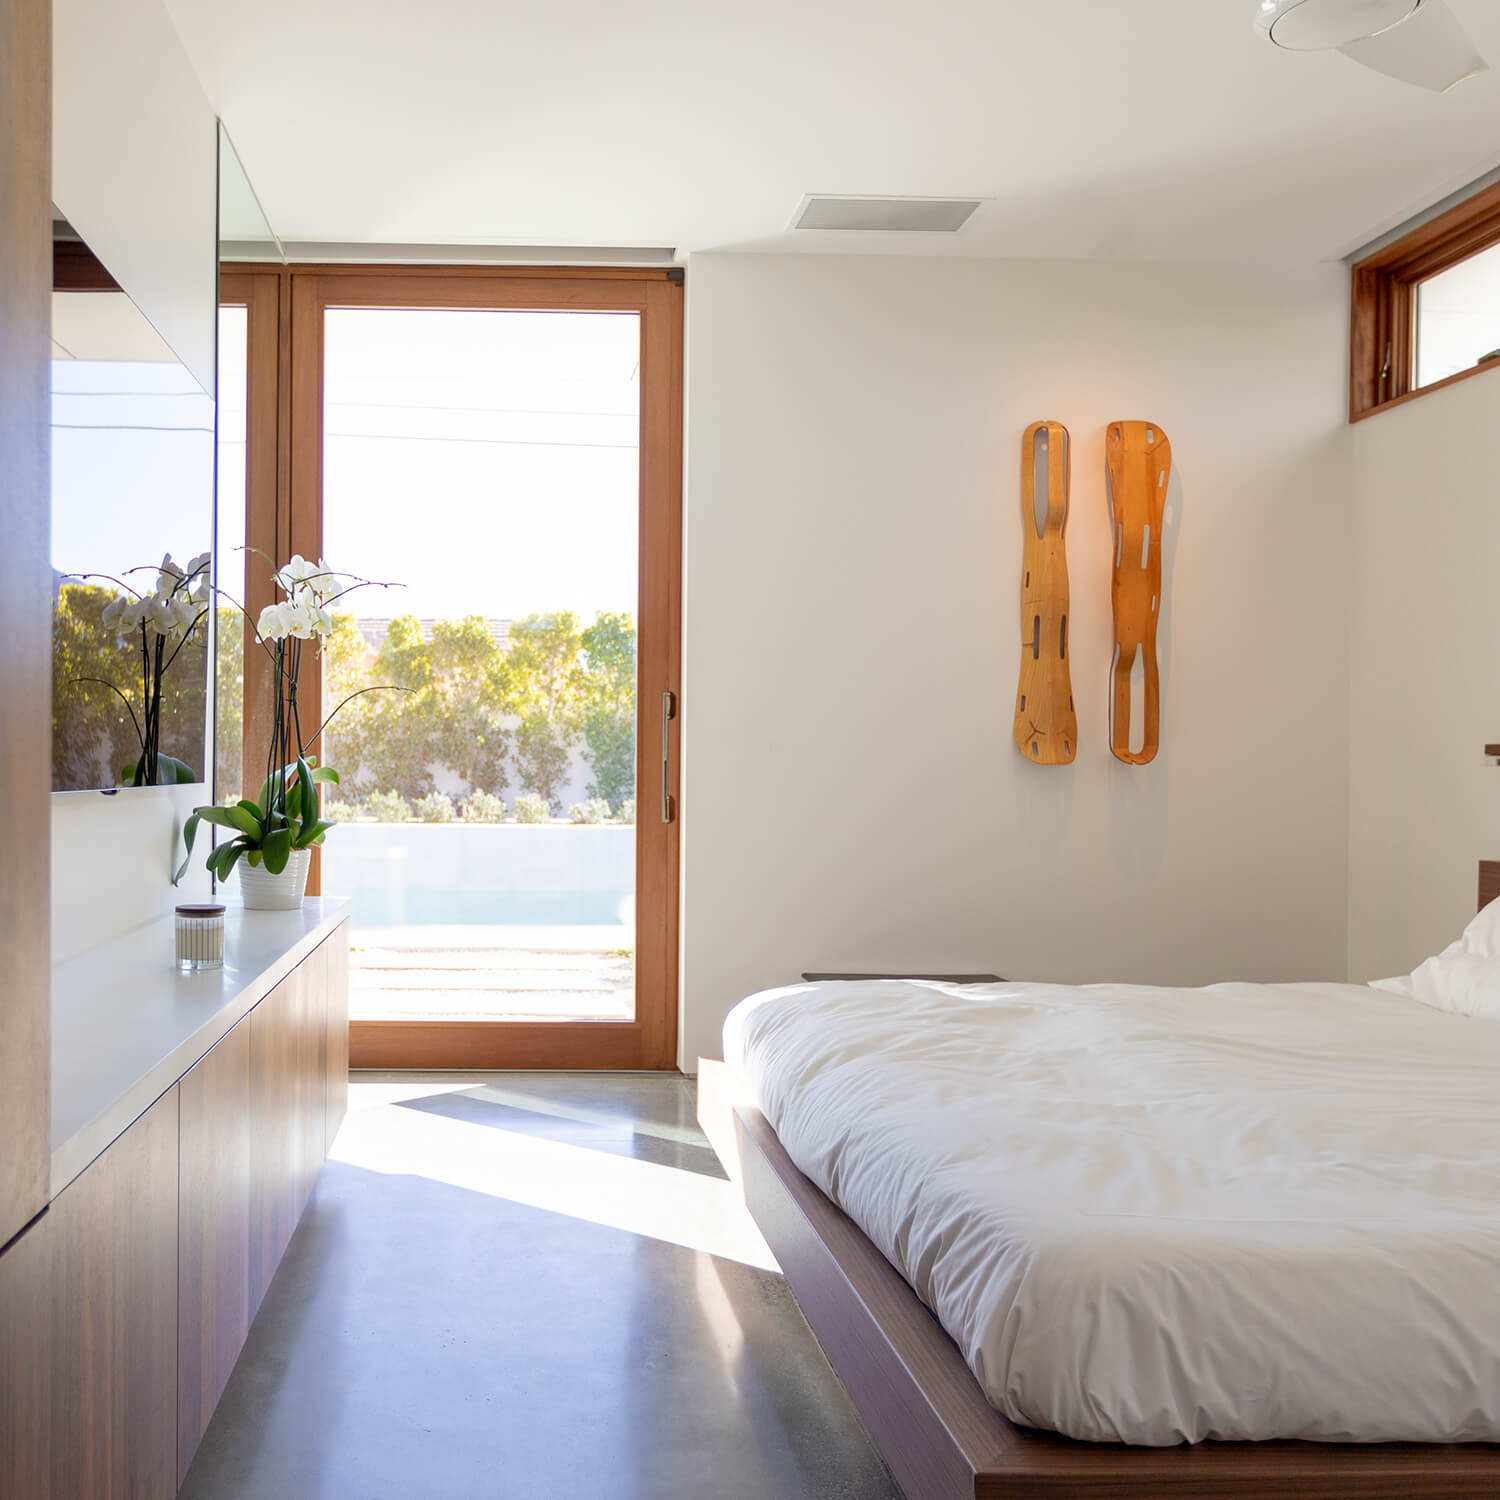 A bedroom in the Axiom Desert House in Palm Springs, California.